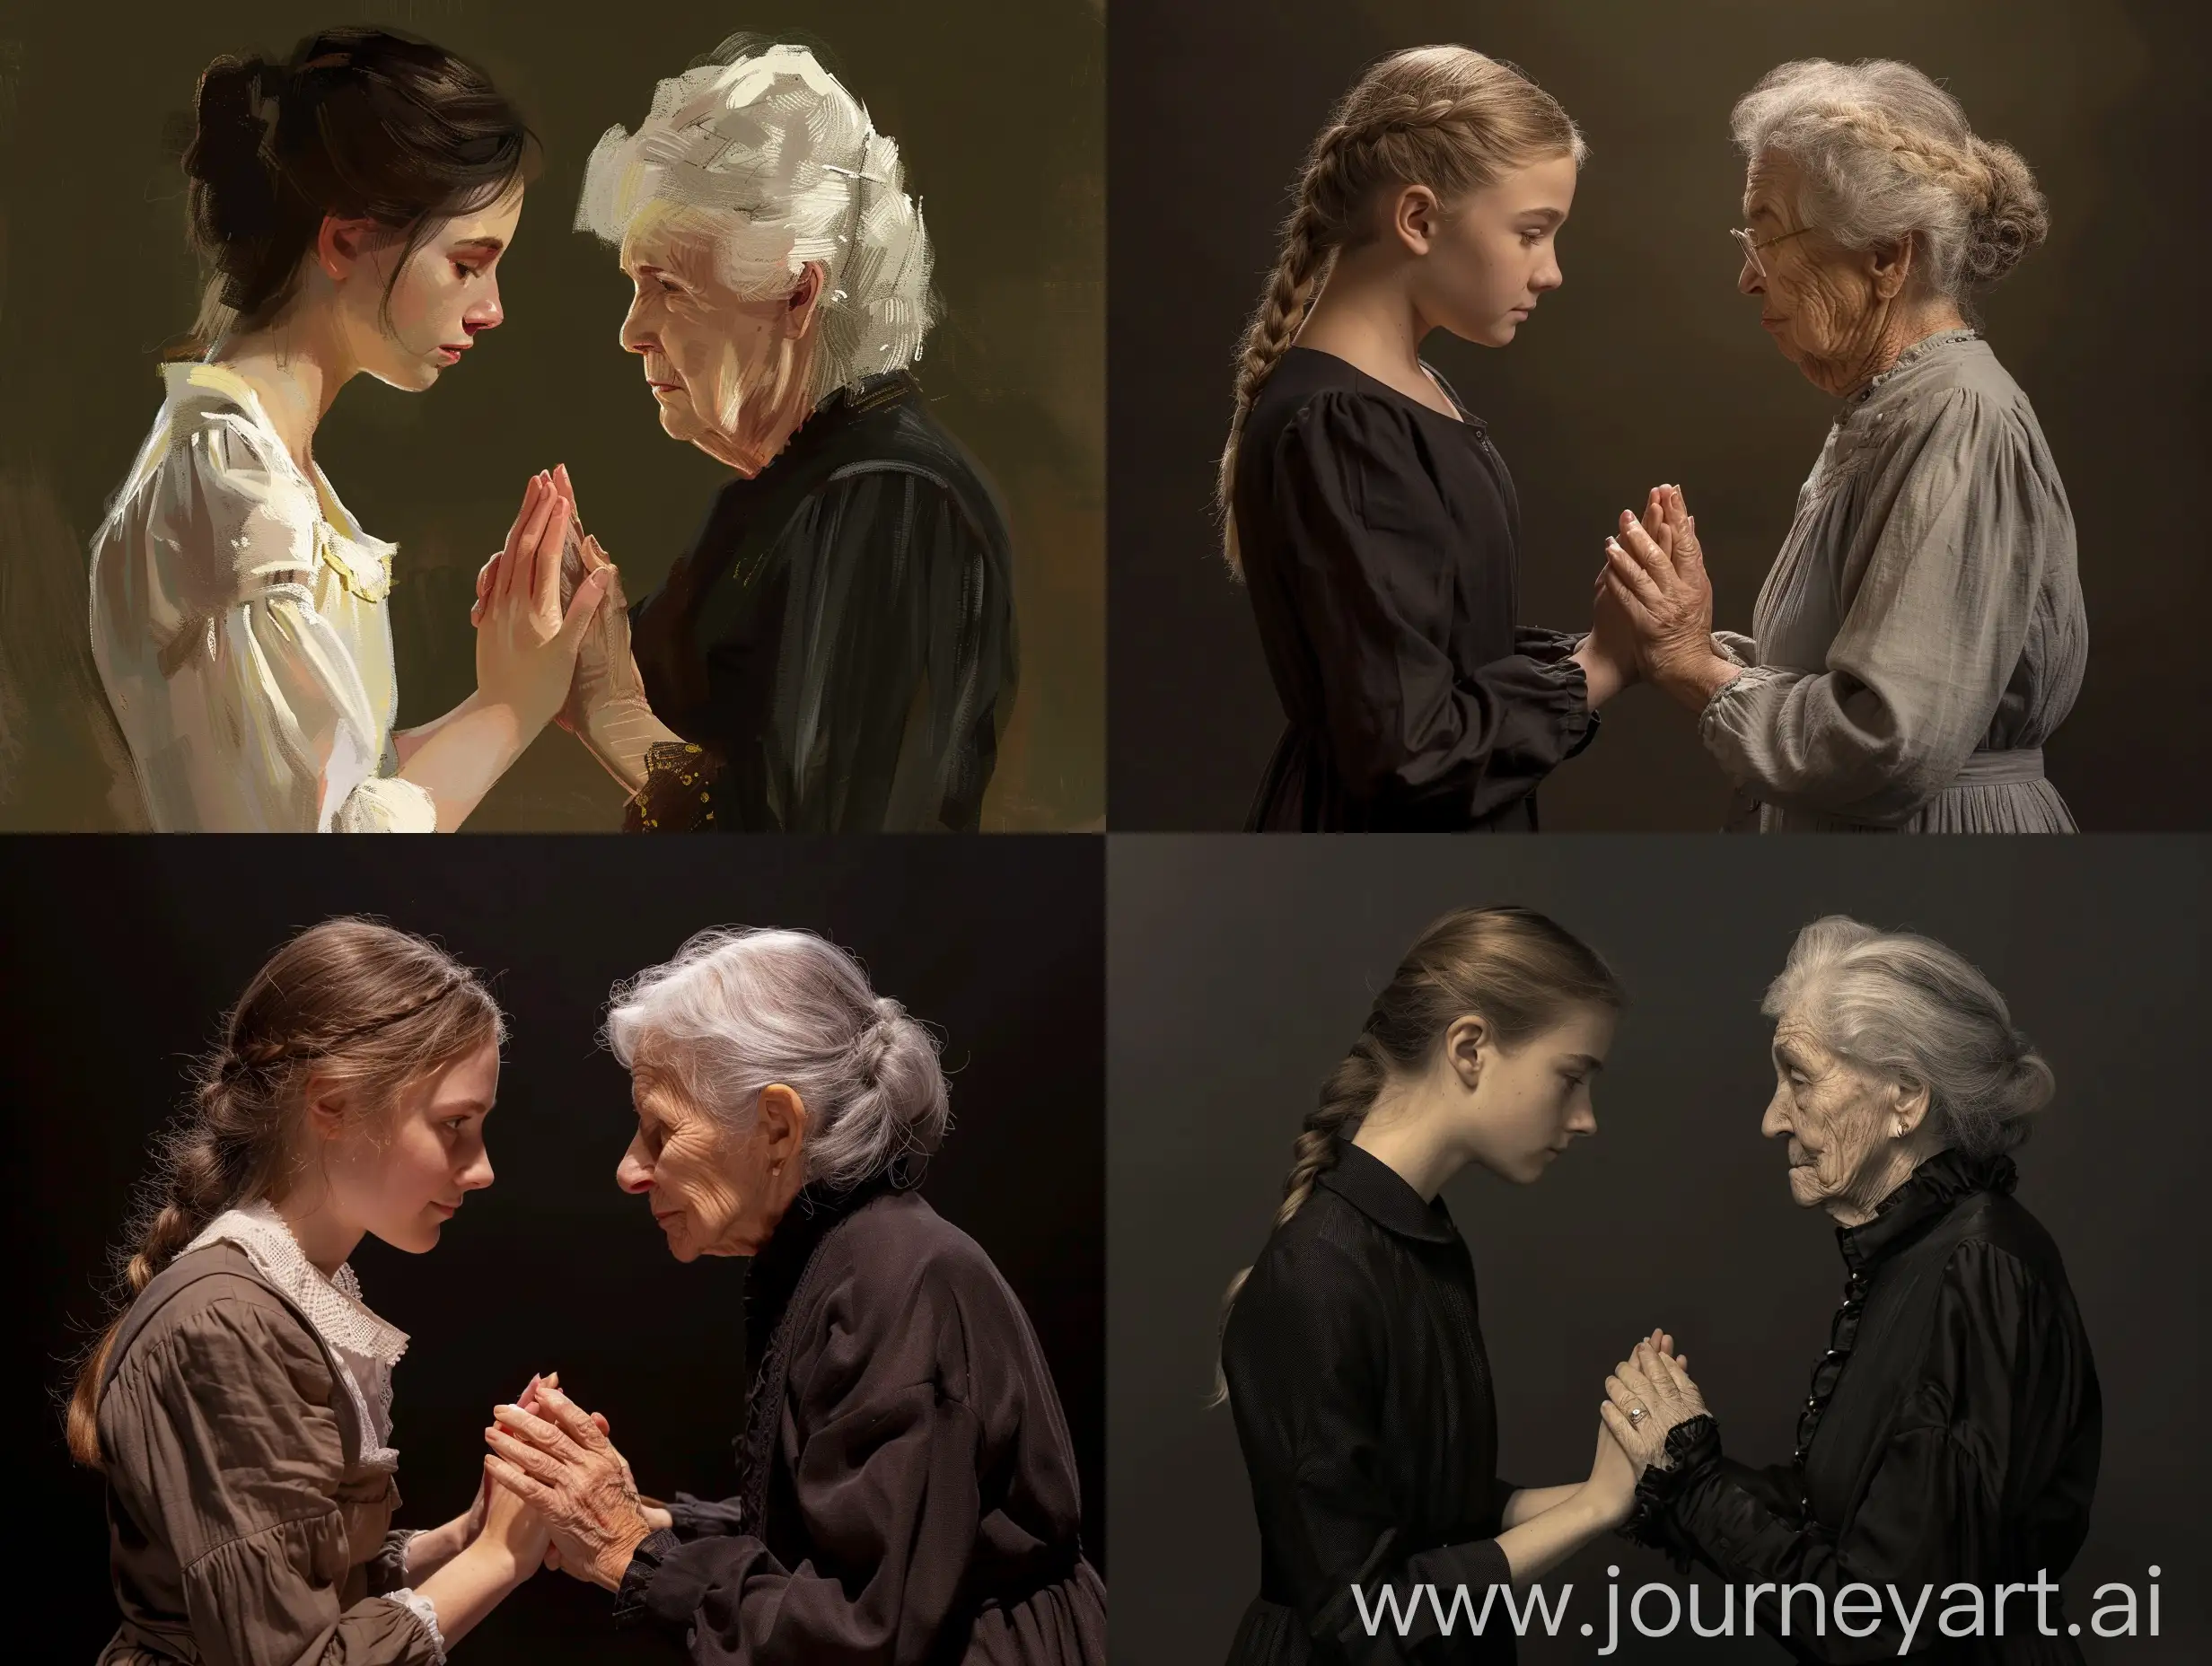 Intergenerational-Prayer-Moment-17YearOld-and-Elderly-Woman-Holding-Hands